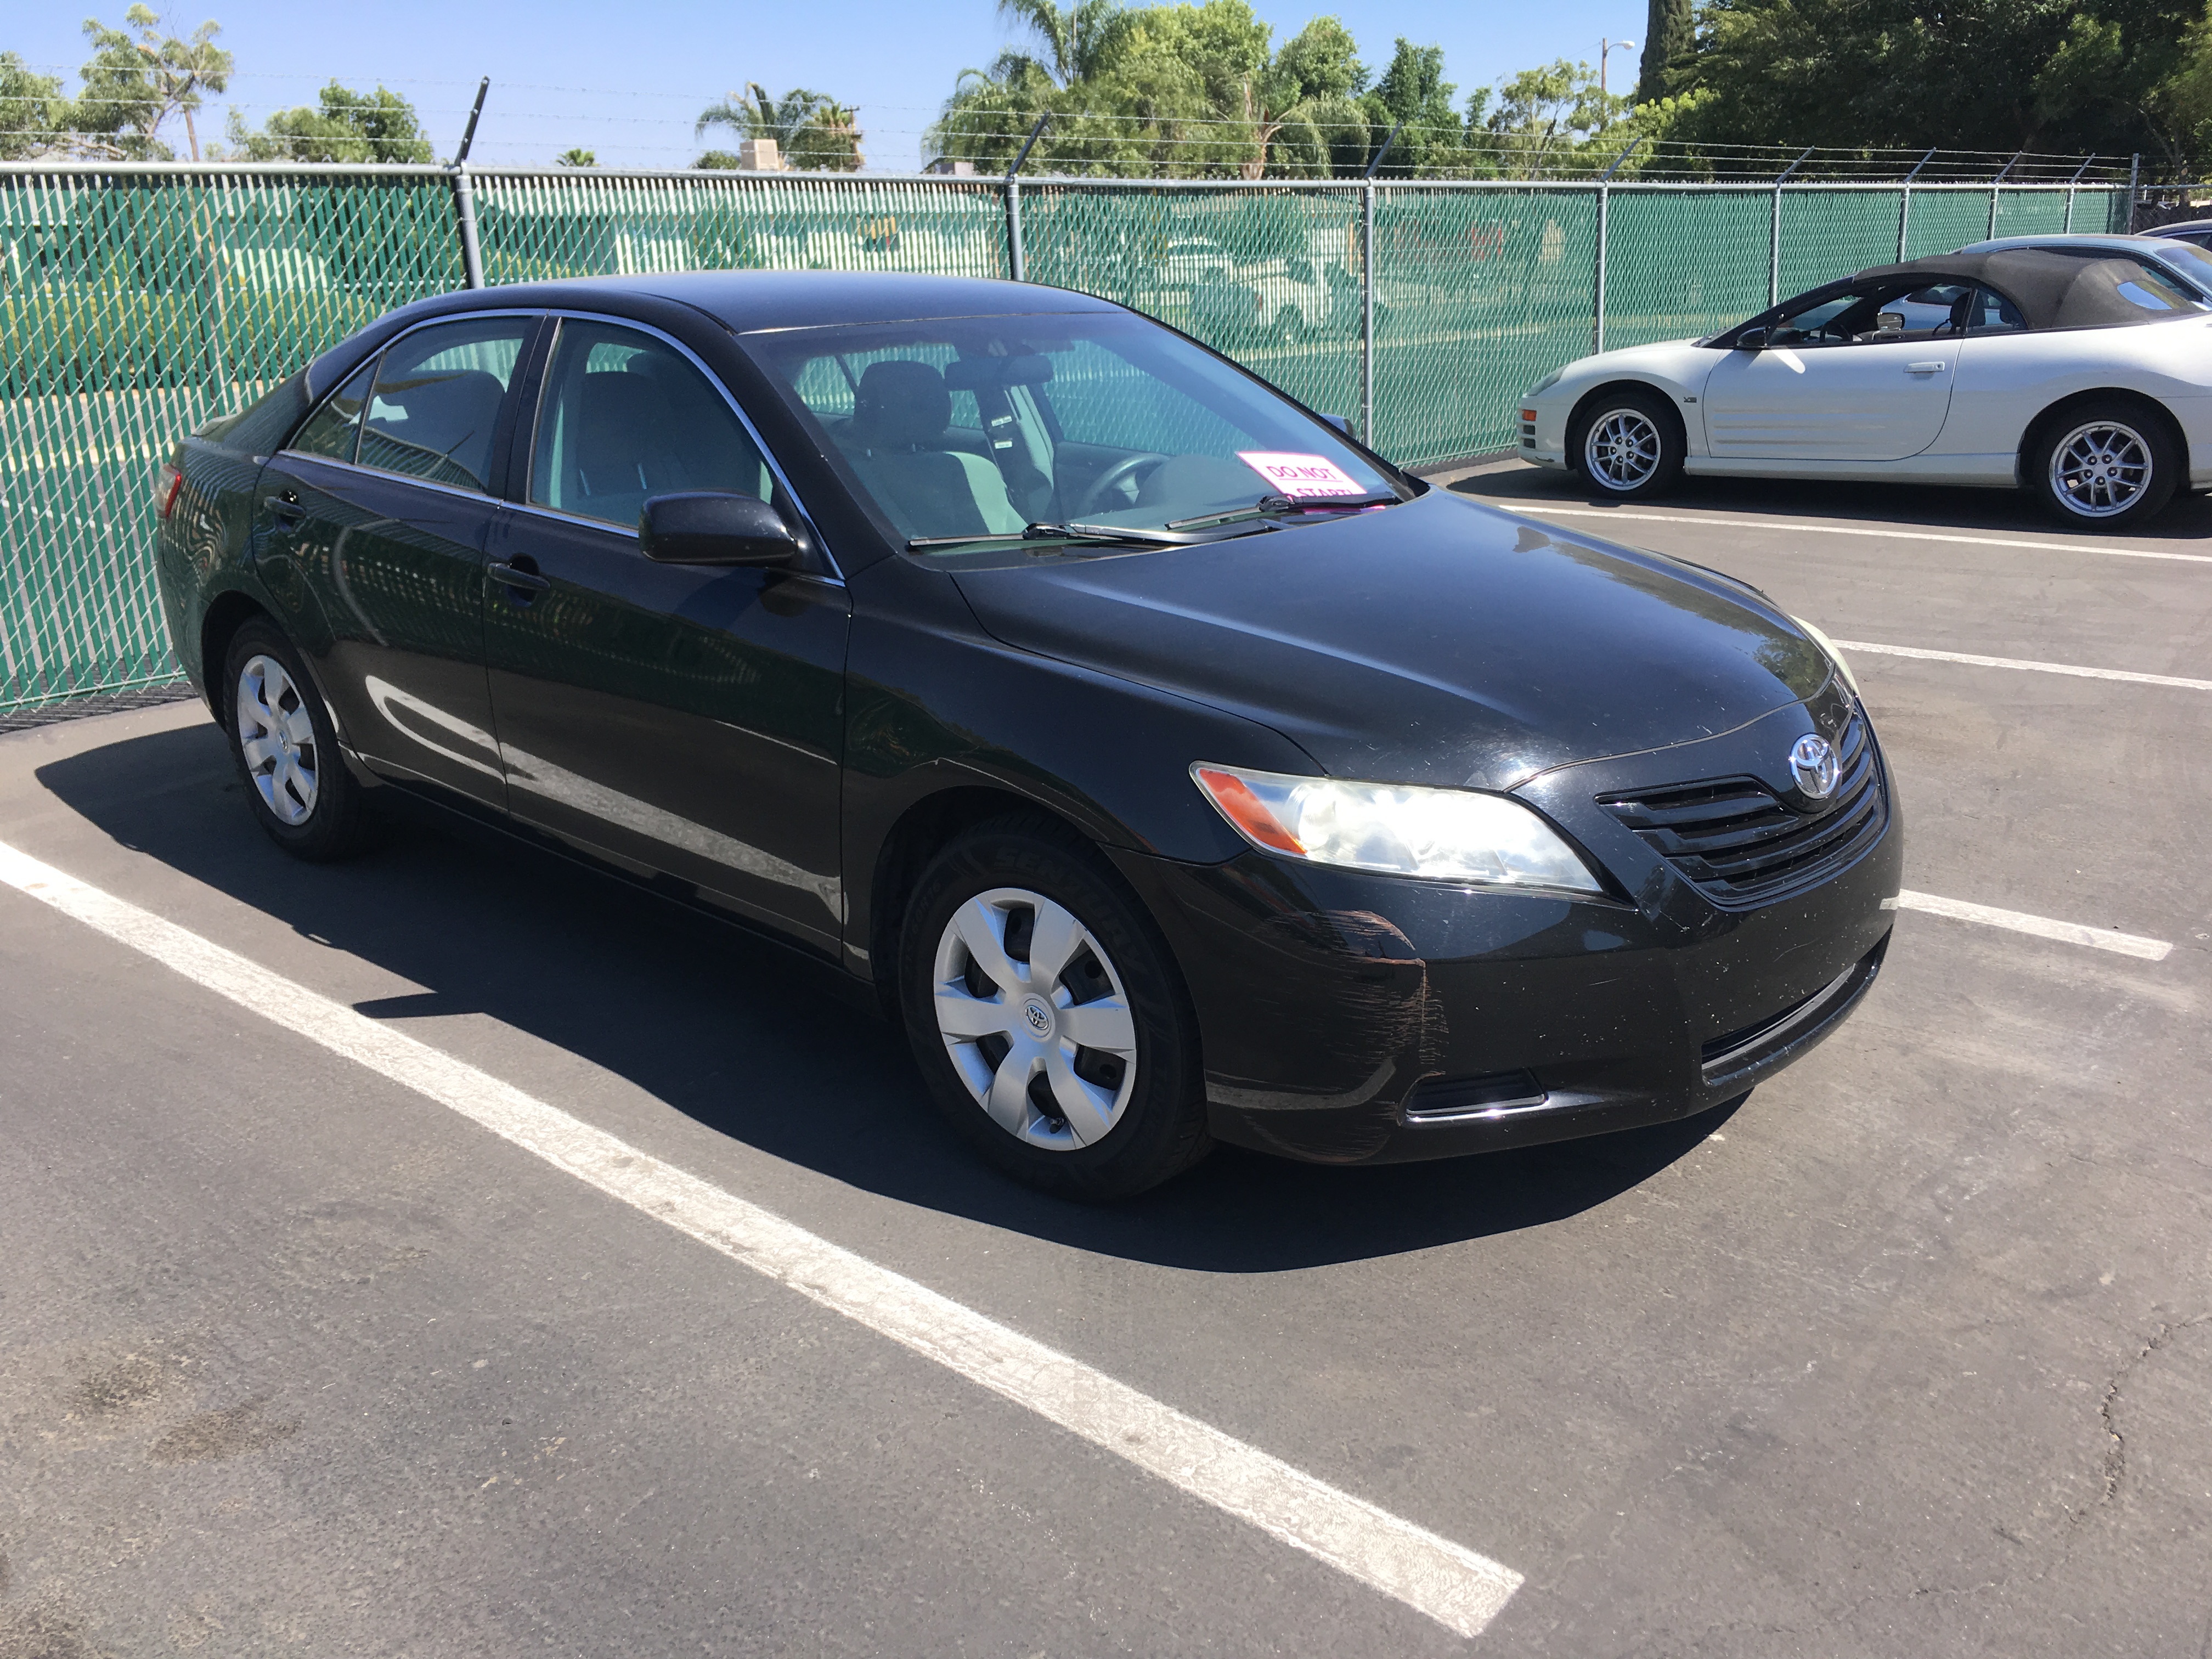 sell-08-Toyota-Camry-Imperial-Beach